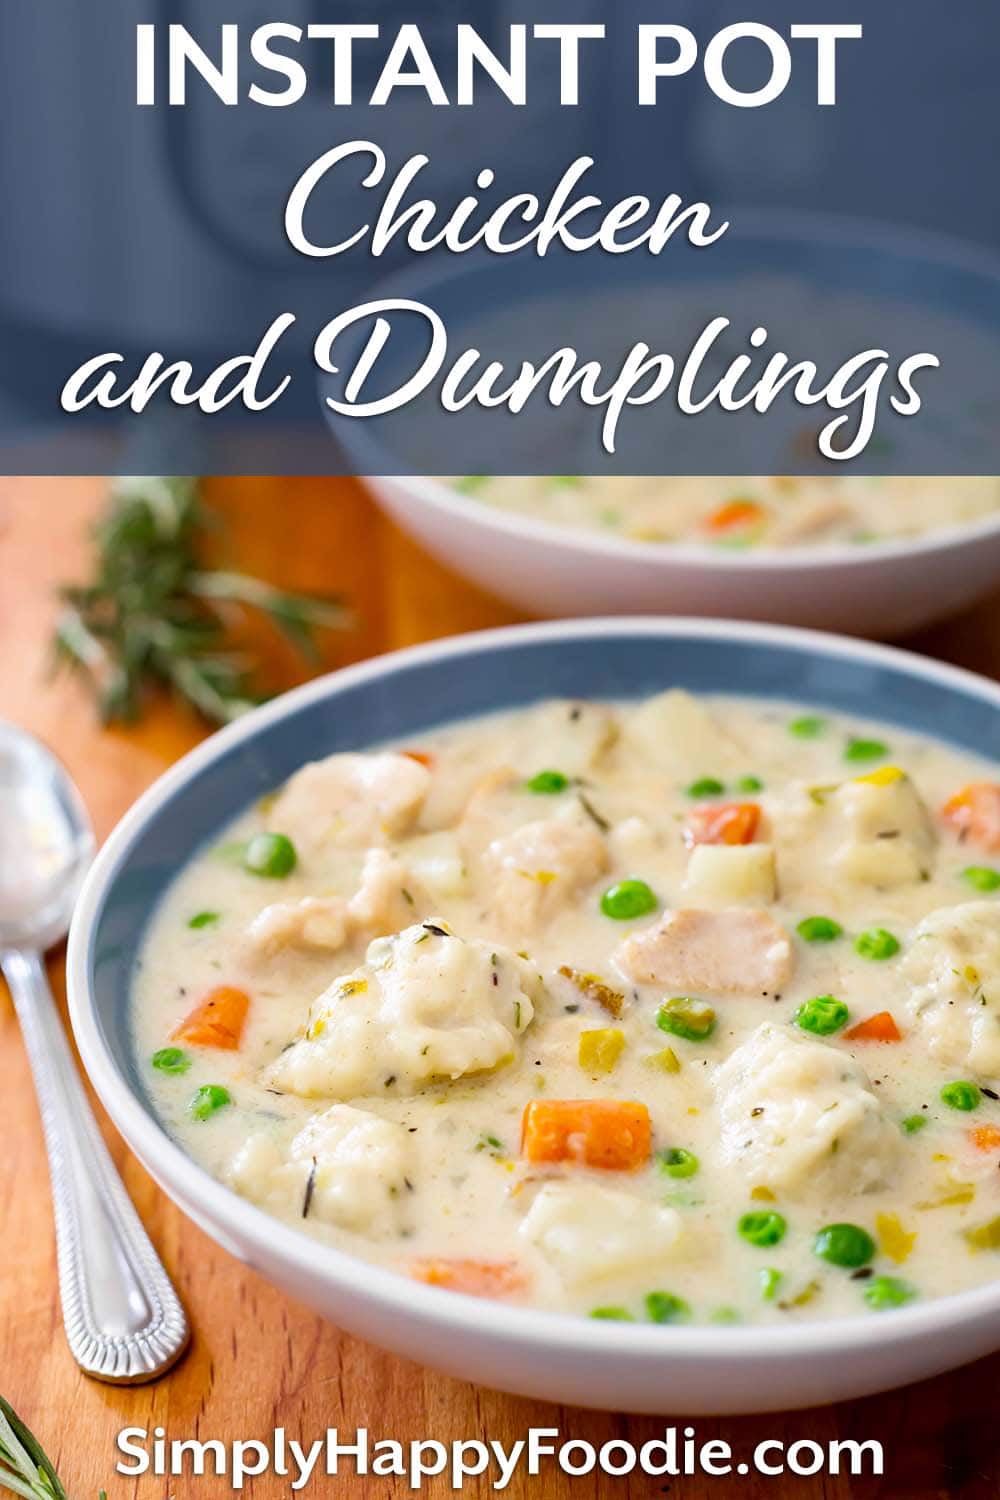 Instant Pot Chicken and Dumplings with title and simply happy foodie.com logo